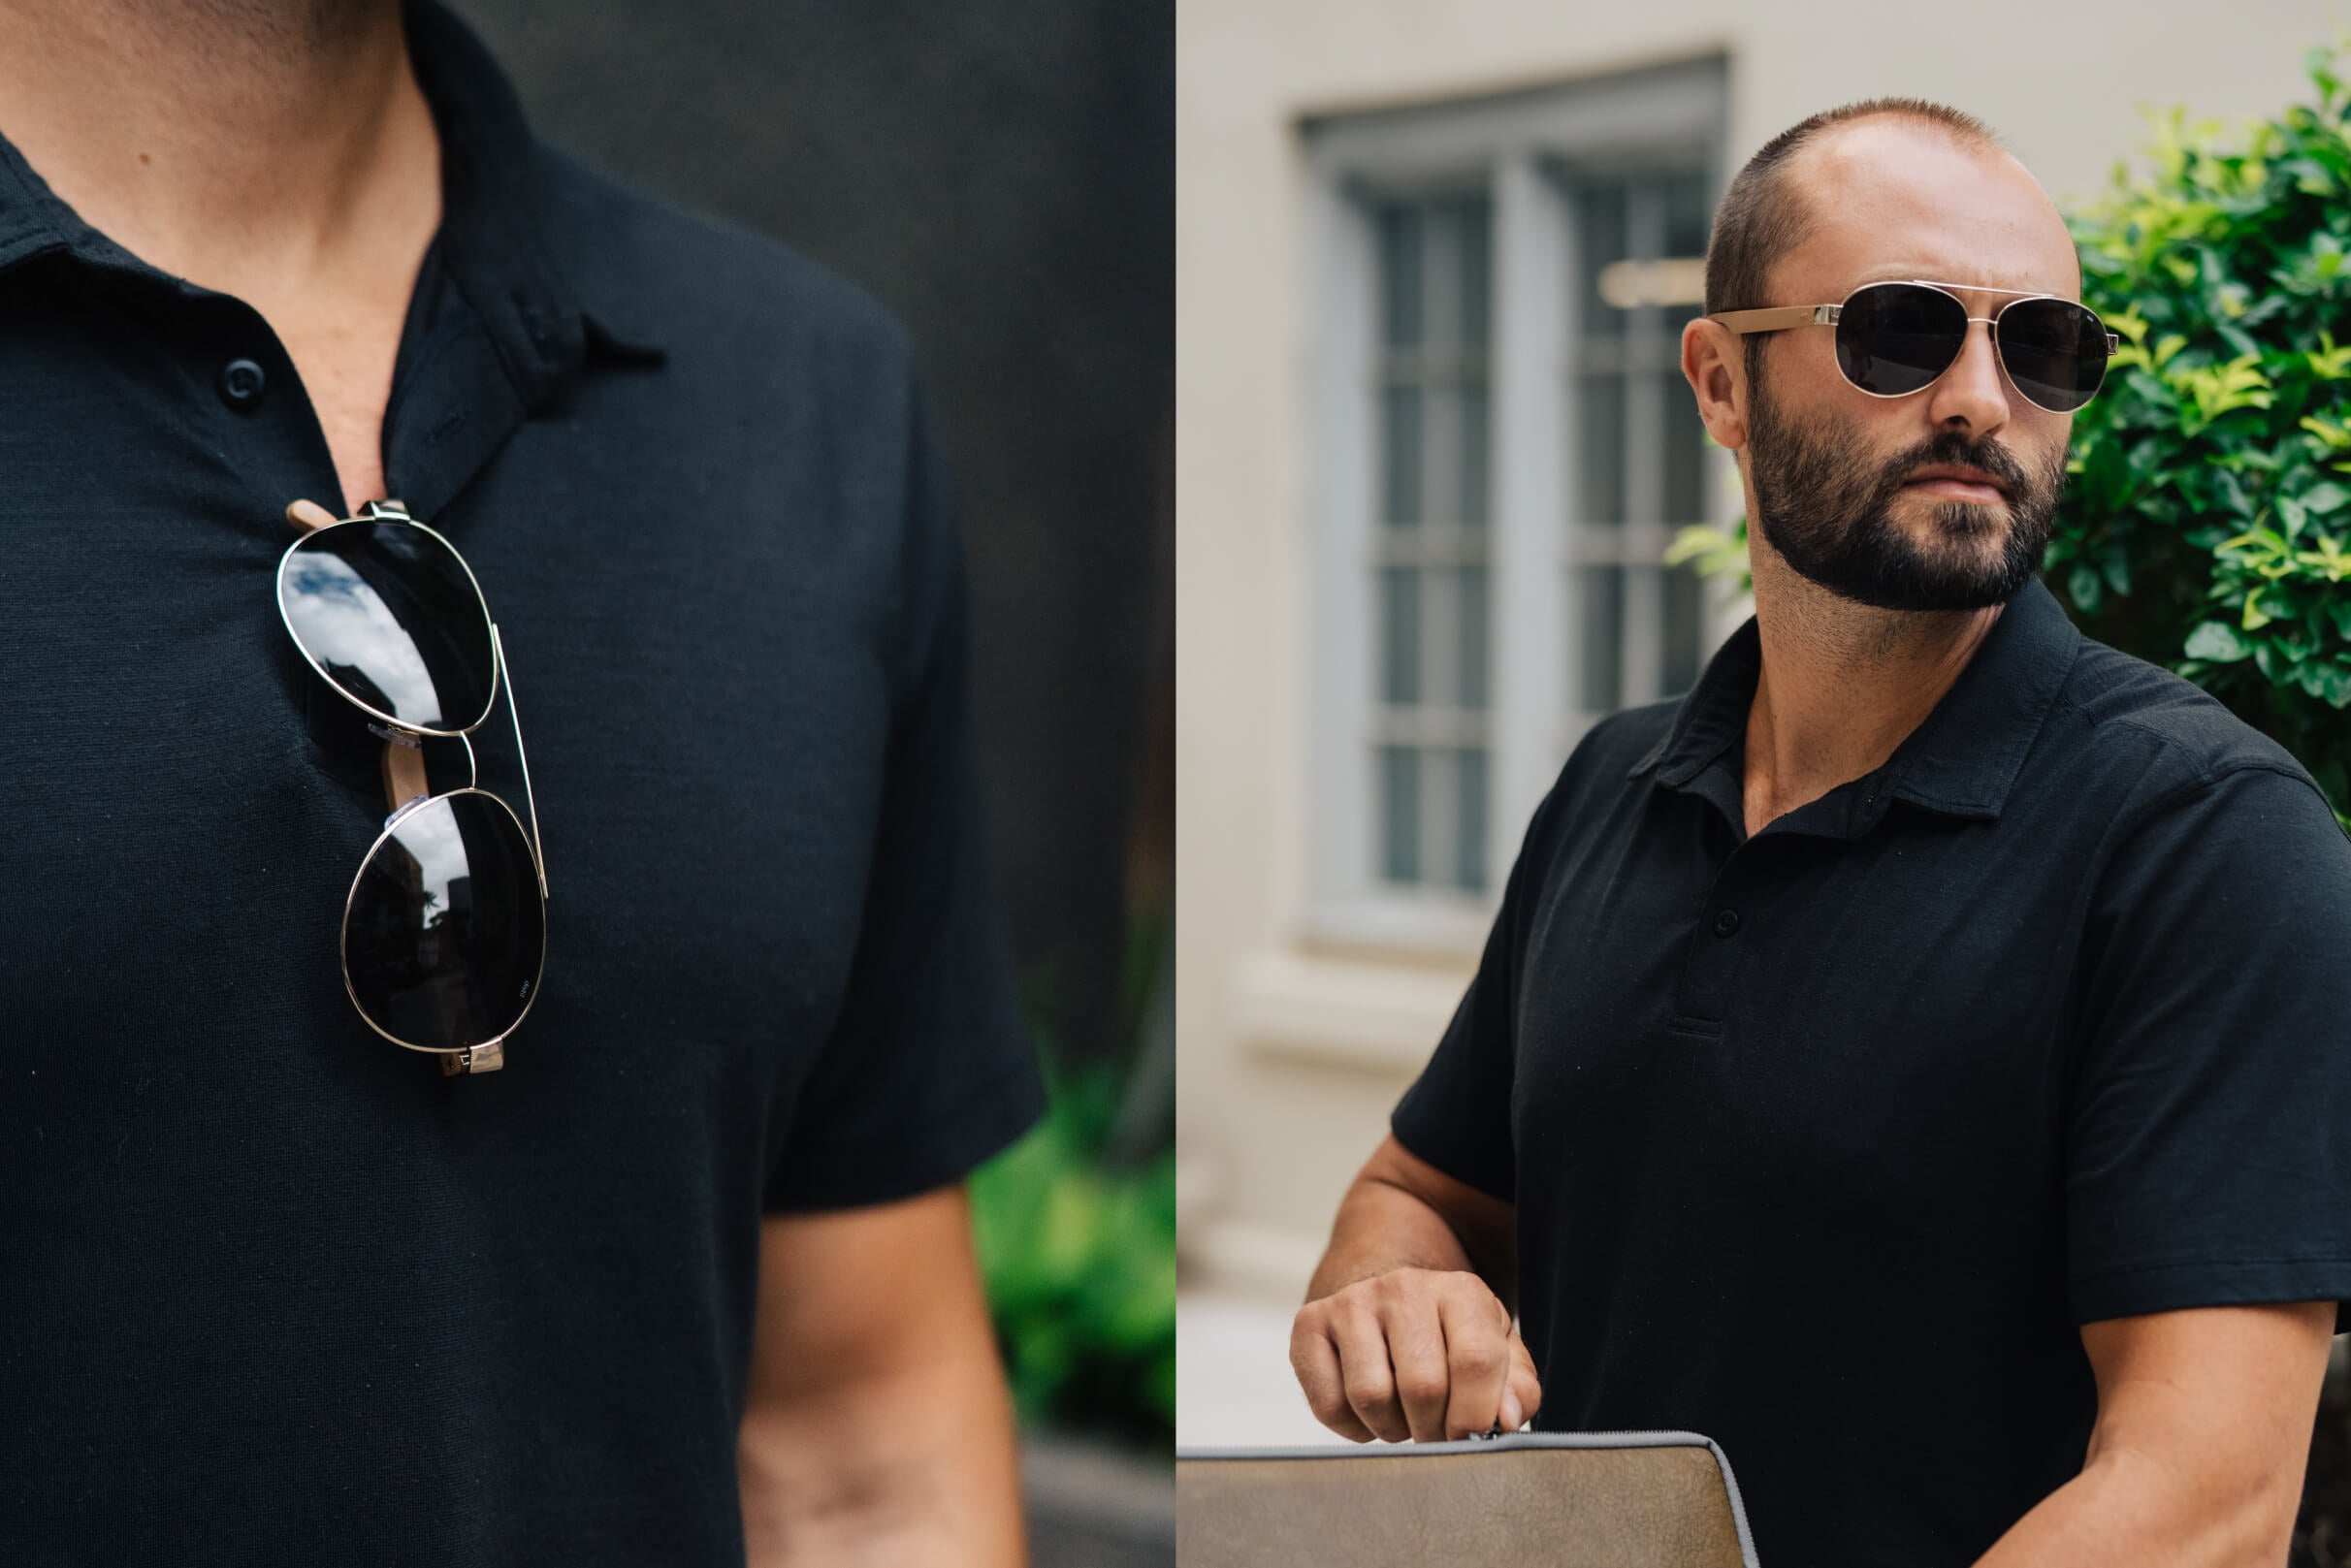 Two photos, one of a pair of titanium MagLock sunglasses clipped to a man's shirt, the other of a man outside wearing Maverick aviator sunglasses